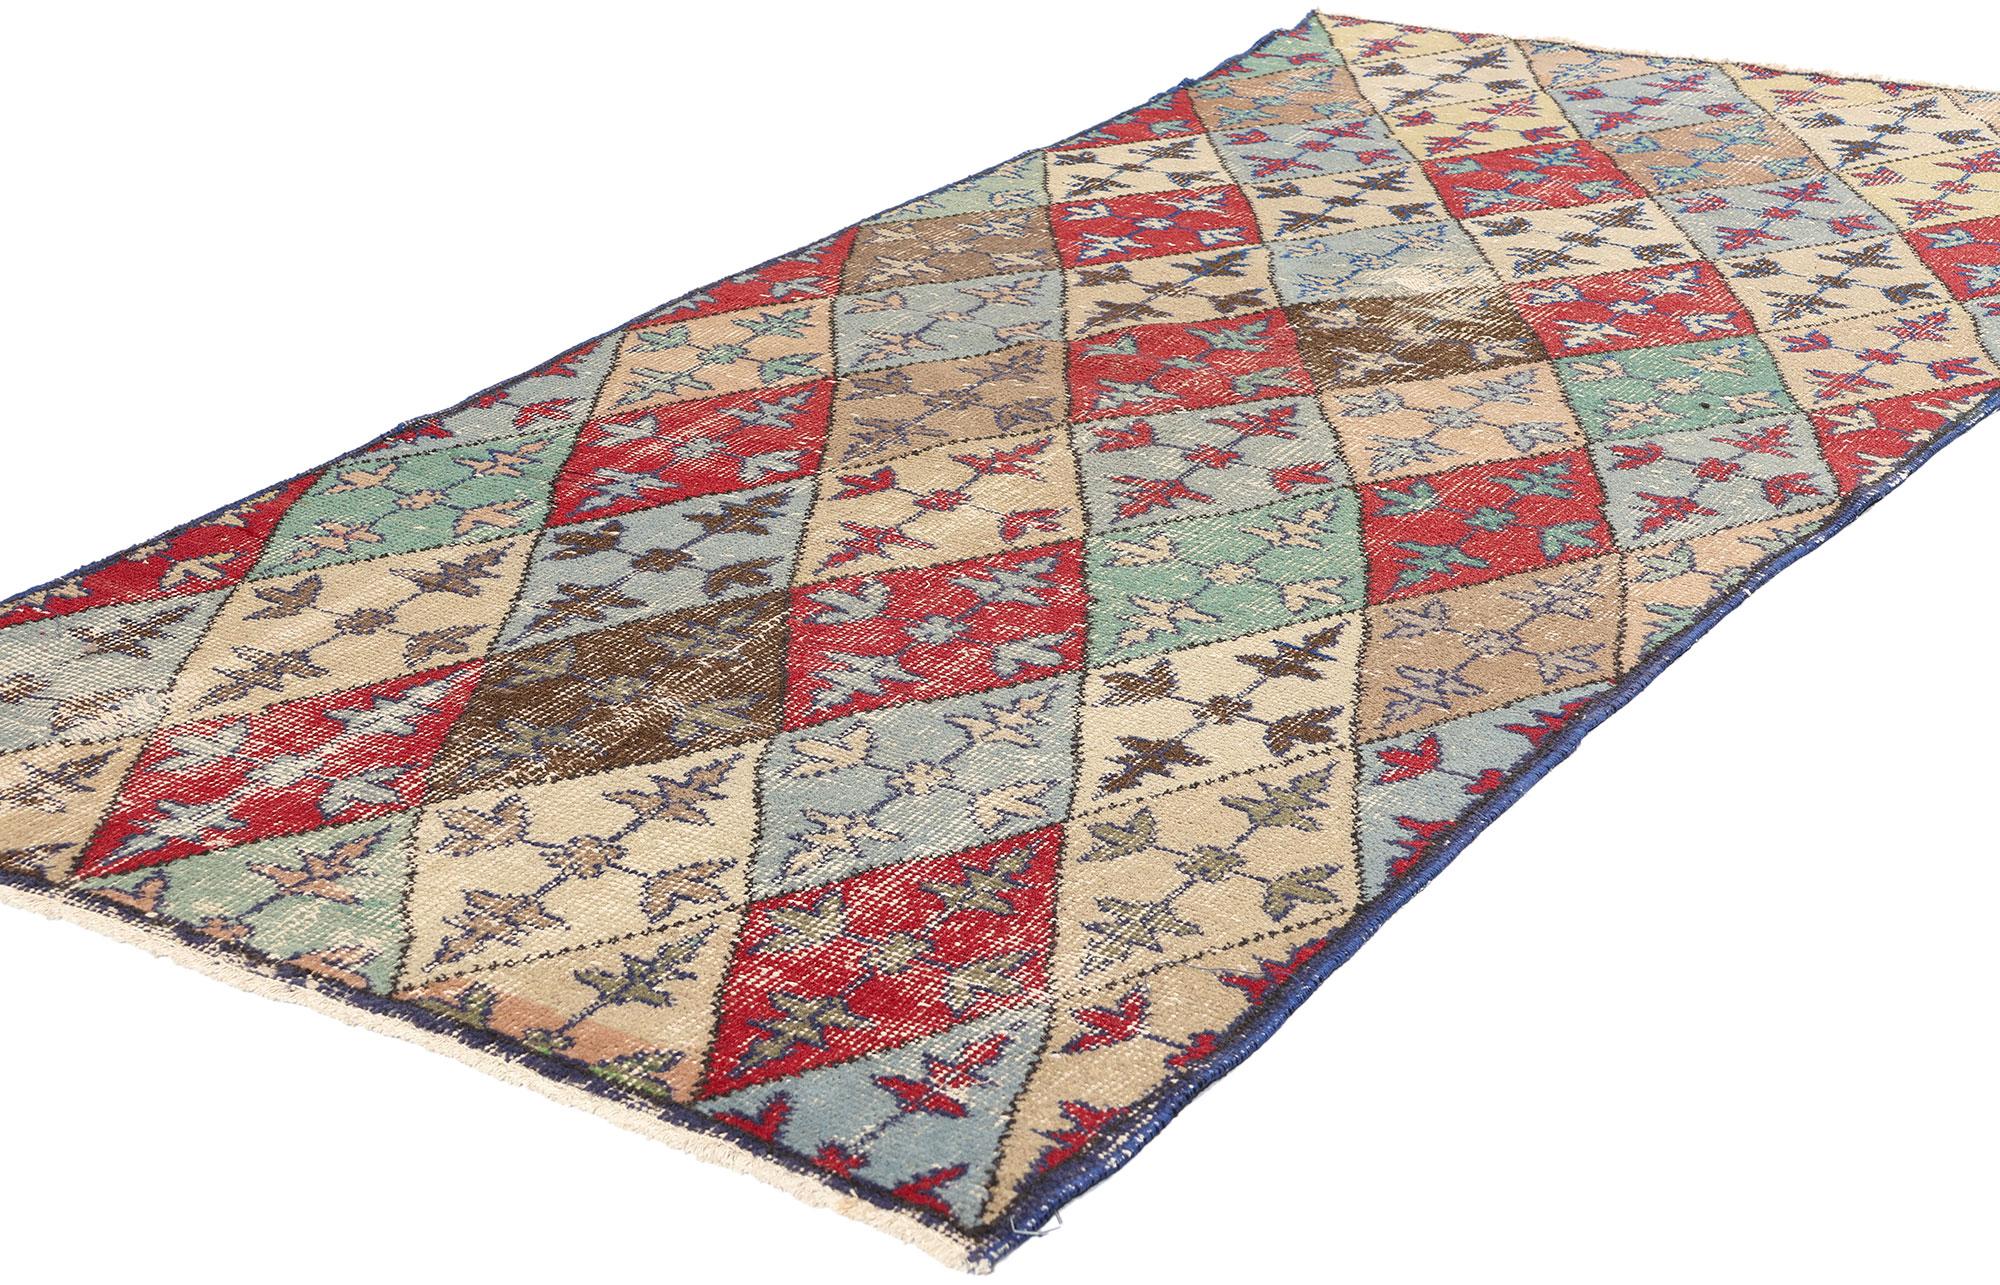 51930 Zeki Muren Vintage Turkish Sivas Rug, 04'04 x 07'02. Nestled within the serene landscapes of Turkey's Sivas region, Zeki Muren Turkish Sivas rugs pay homage to the revered Turkish singer whose legacy inspired their creation. Renowned for their